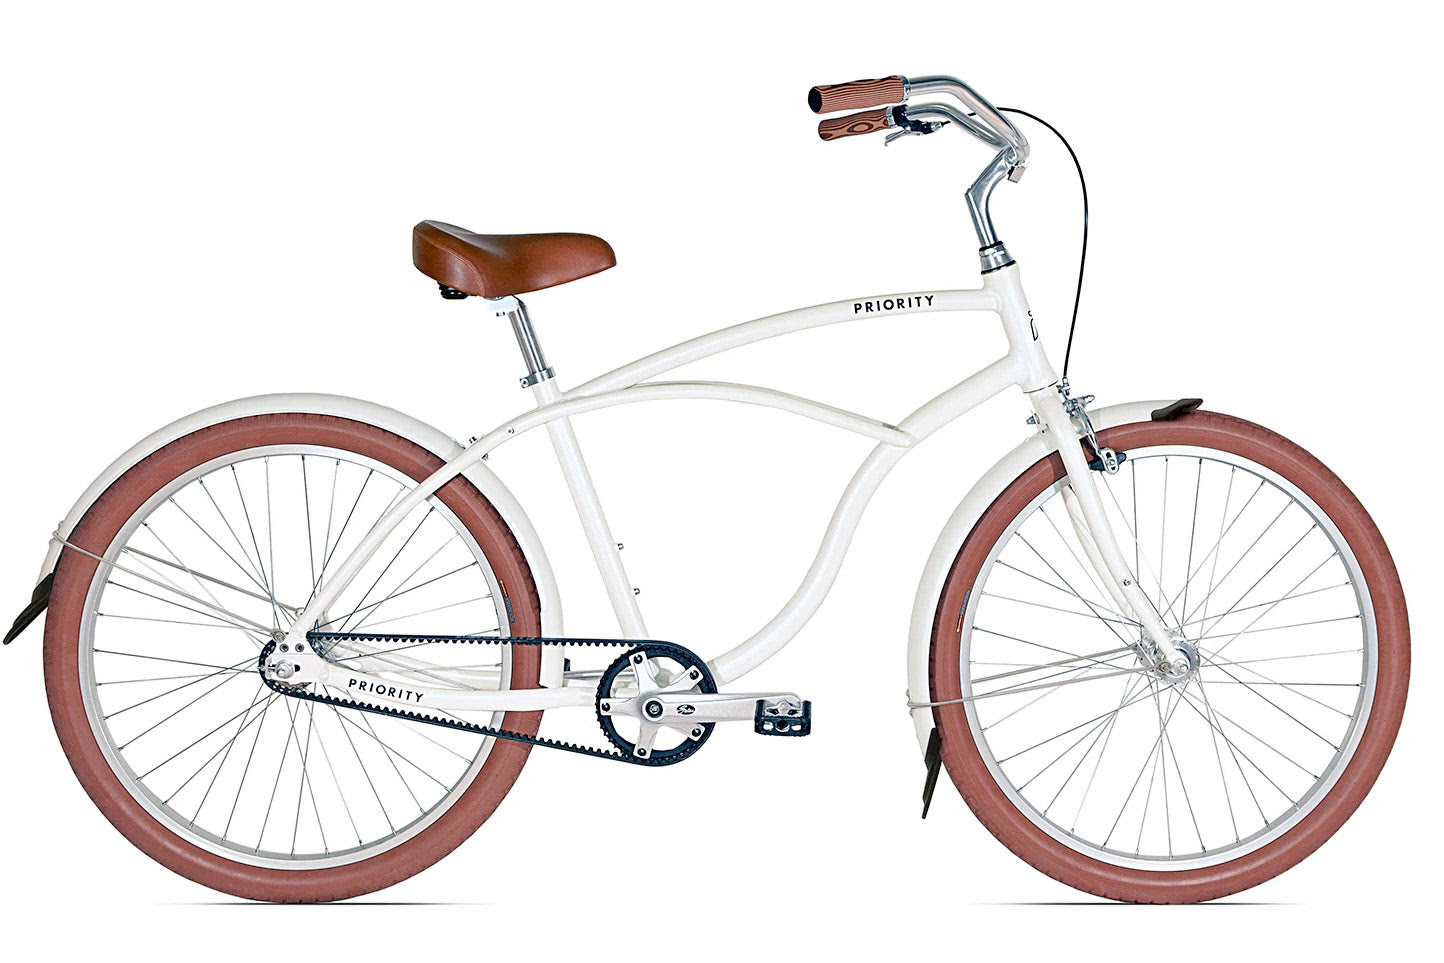 A Priority-brand white beach cruiser bicycle with brown leather accents.